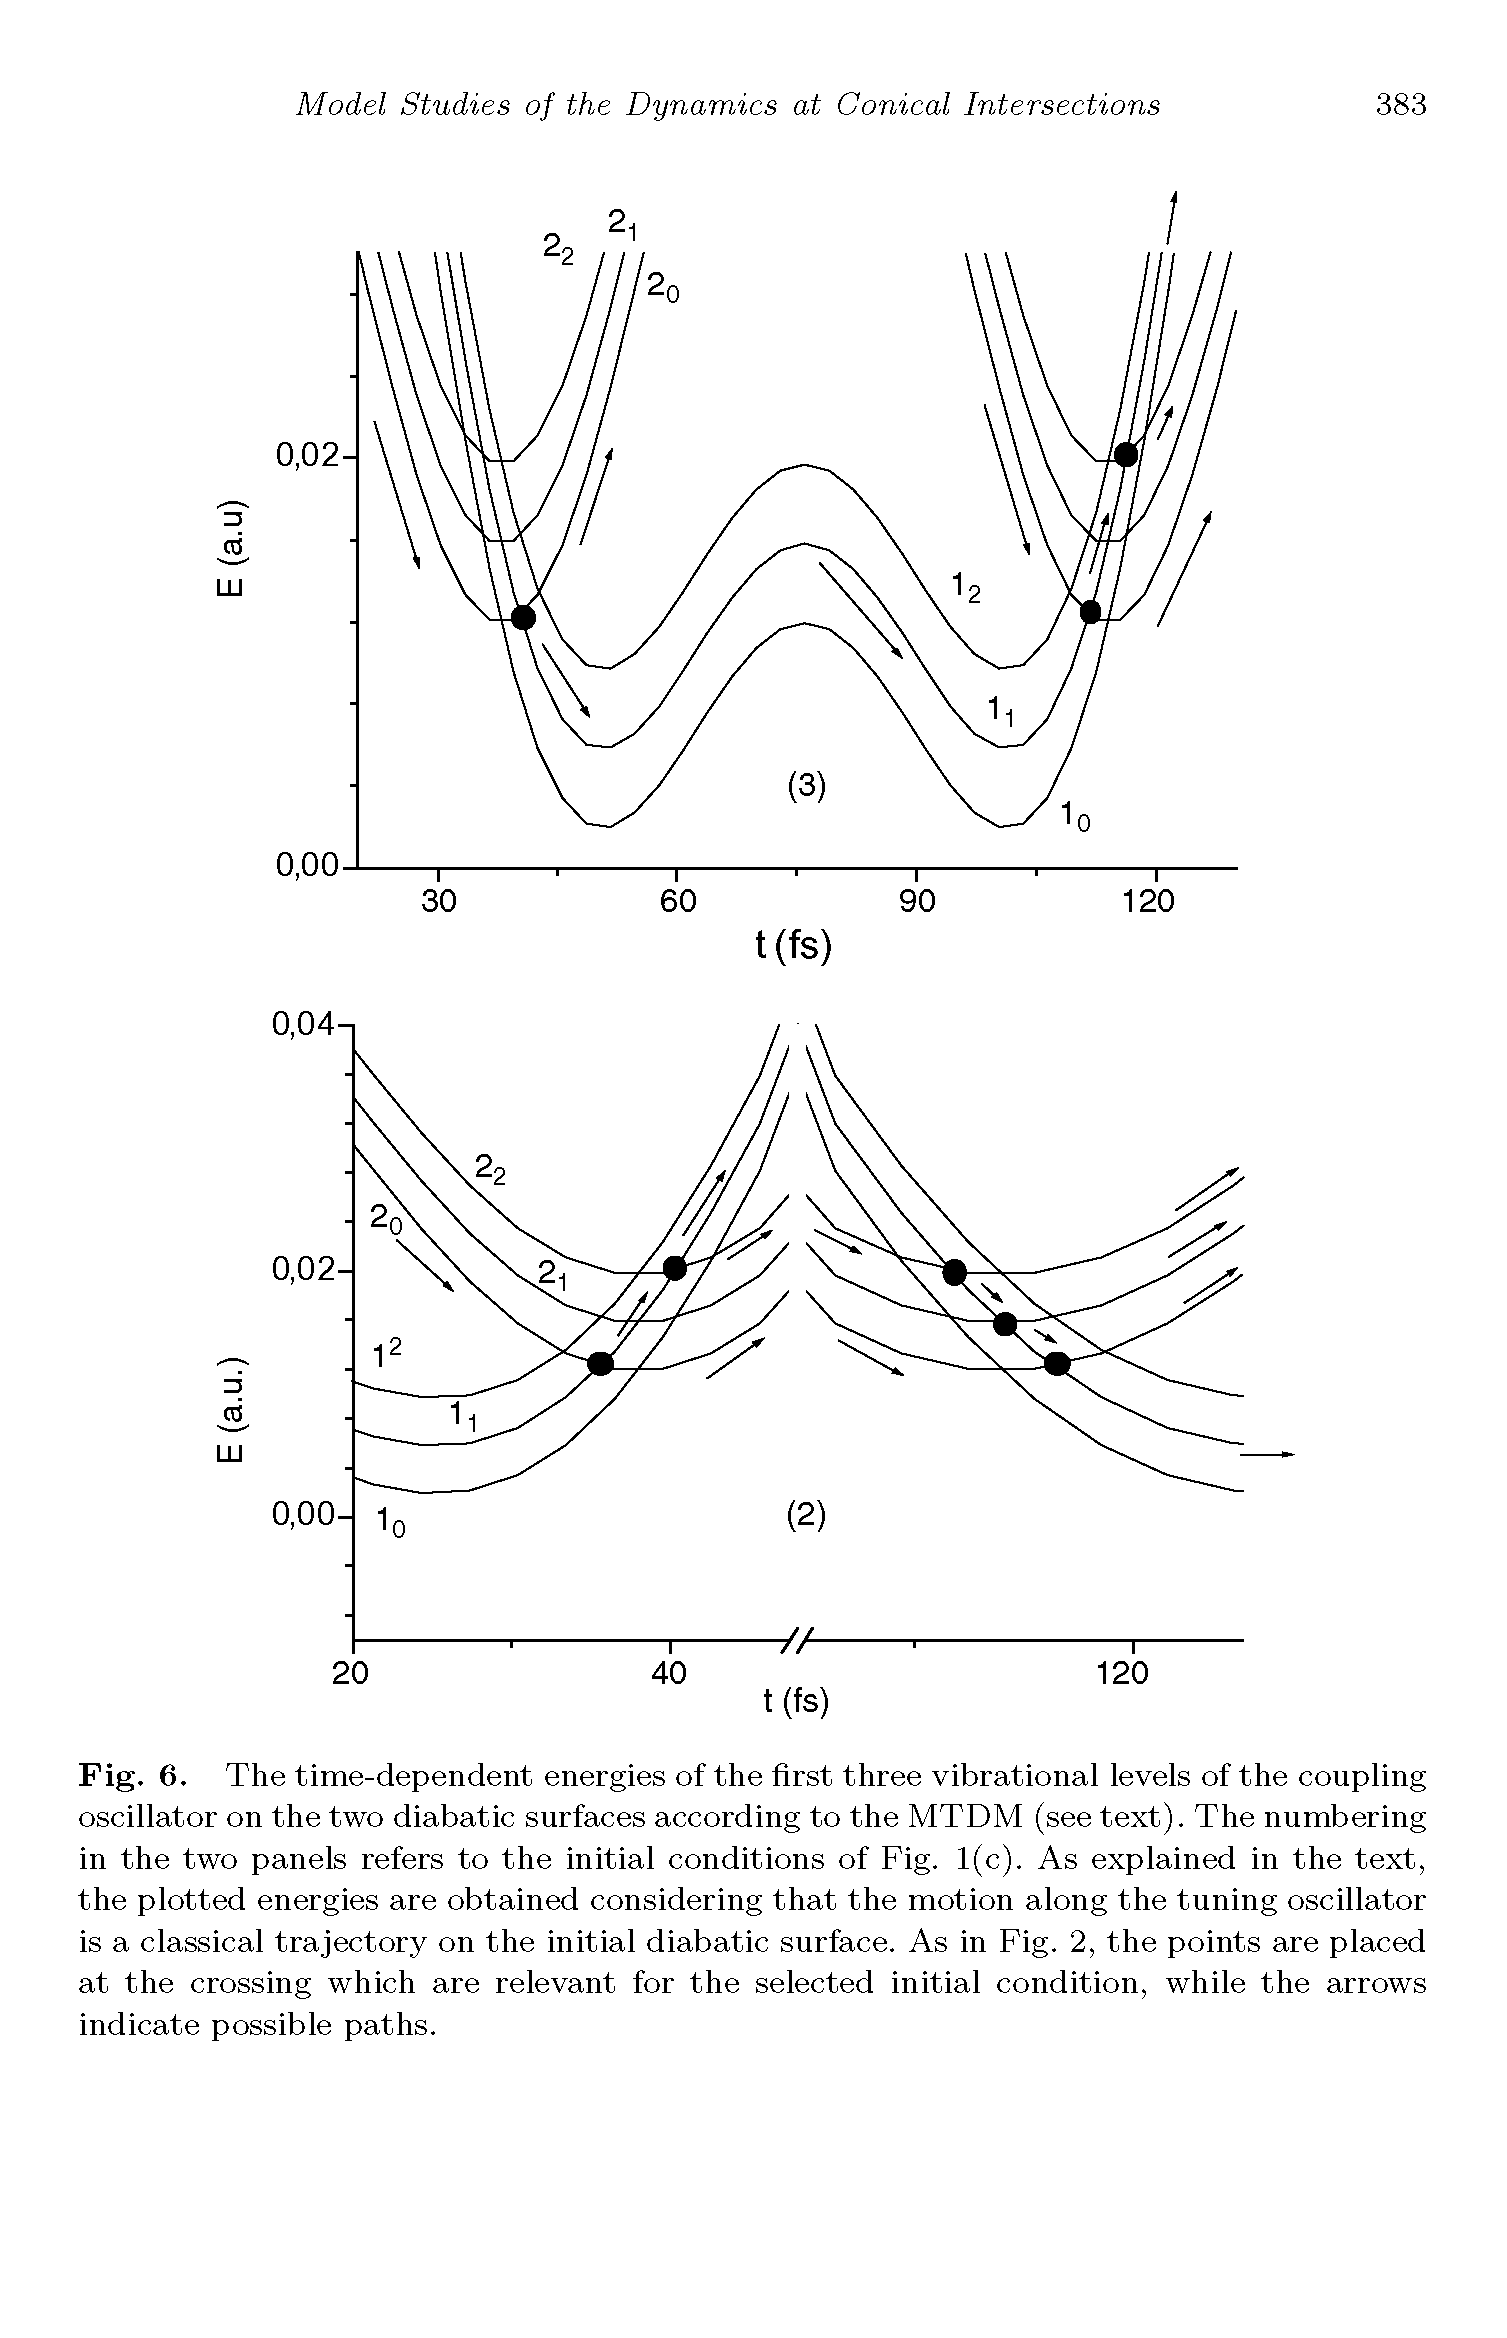 Fig. 6. The time-dependent energies of the first three vibrational levels of the coupling oscillator on the two diabatic surfaces according to the MTDM (see text). The numbering in the two panels refers to the initial conditions of Fig. 1(c). As explained in the text, the plotted energies are obtained considering that the motion along the tuning oscillator is a classical trajectory on the initial diabatic surface. As in Fig. 2, the points are placed at the crossing which are relevant for the selected initial condition, while the arrows indicate possible paths.